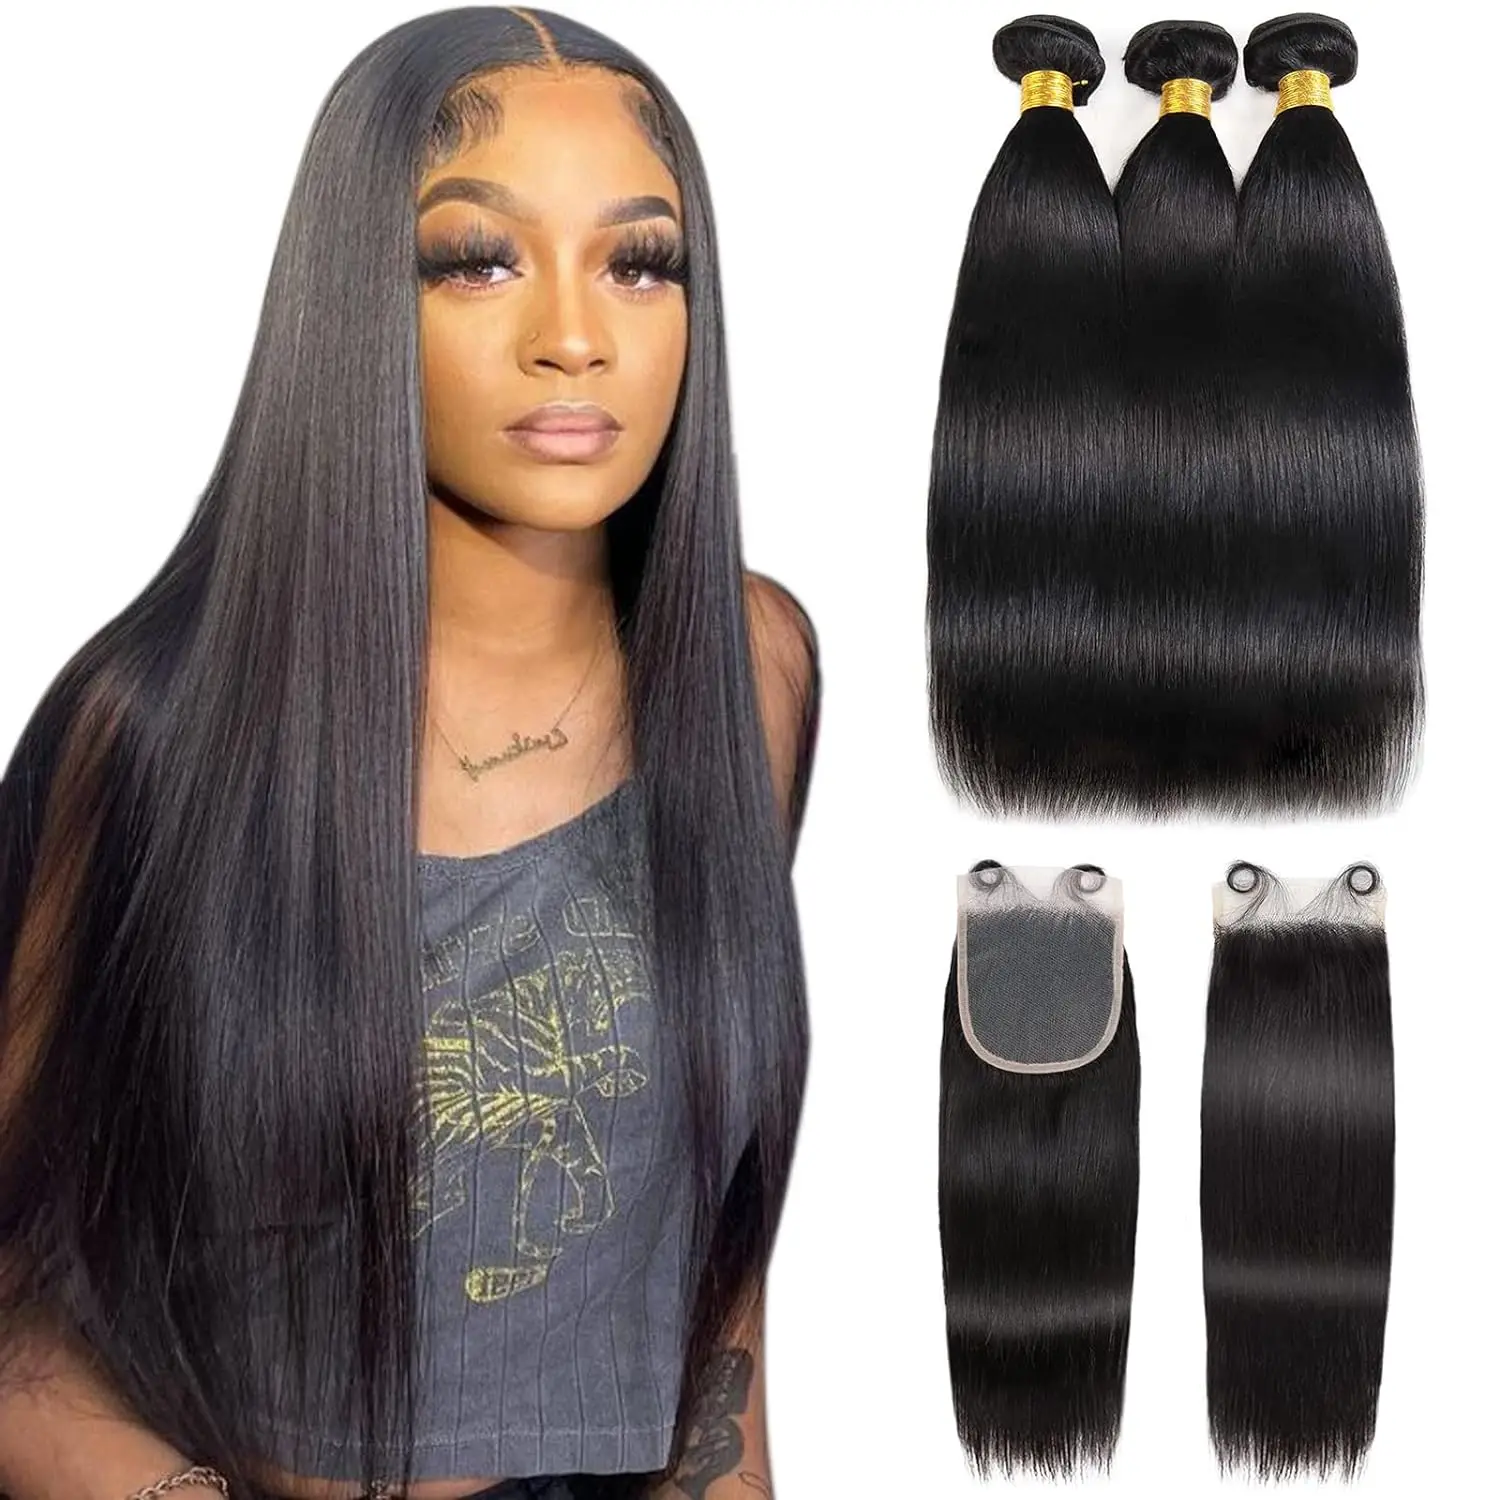 Straight Human Hair Bundles with Closure 100% Unprocessed Brazilian Human Hair 3 Bundles with Frontal 4x4 Closure with Baby Hair